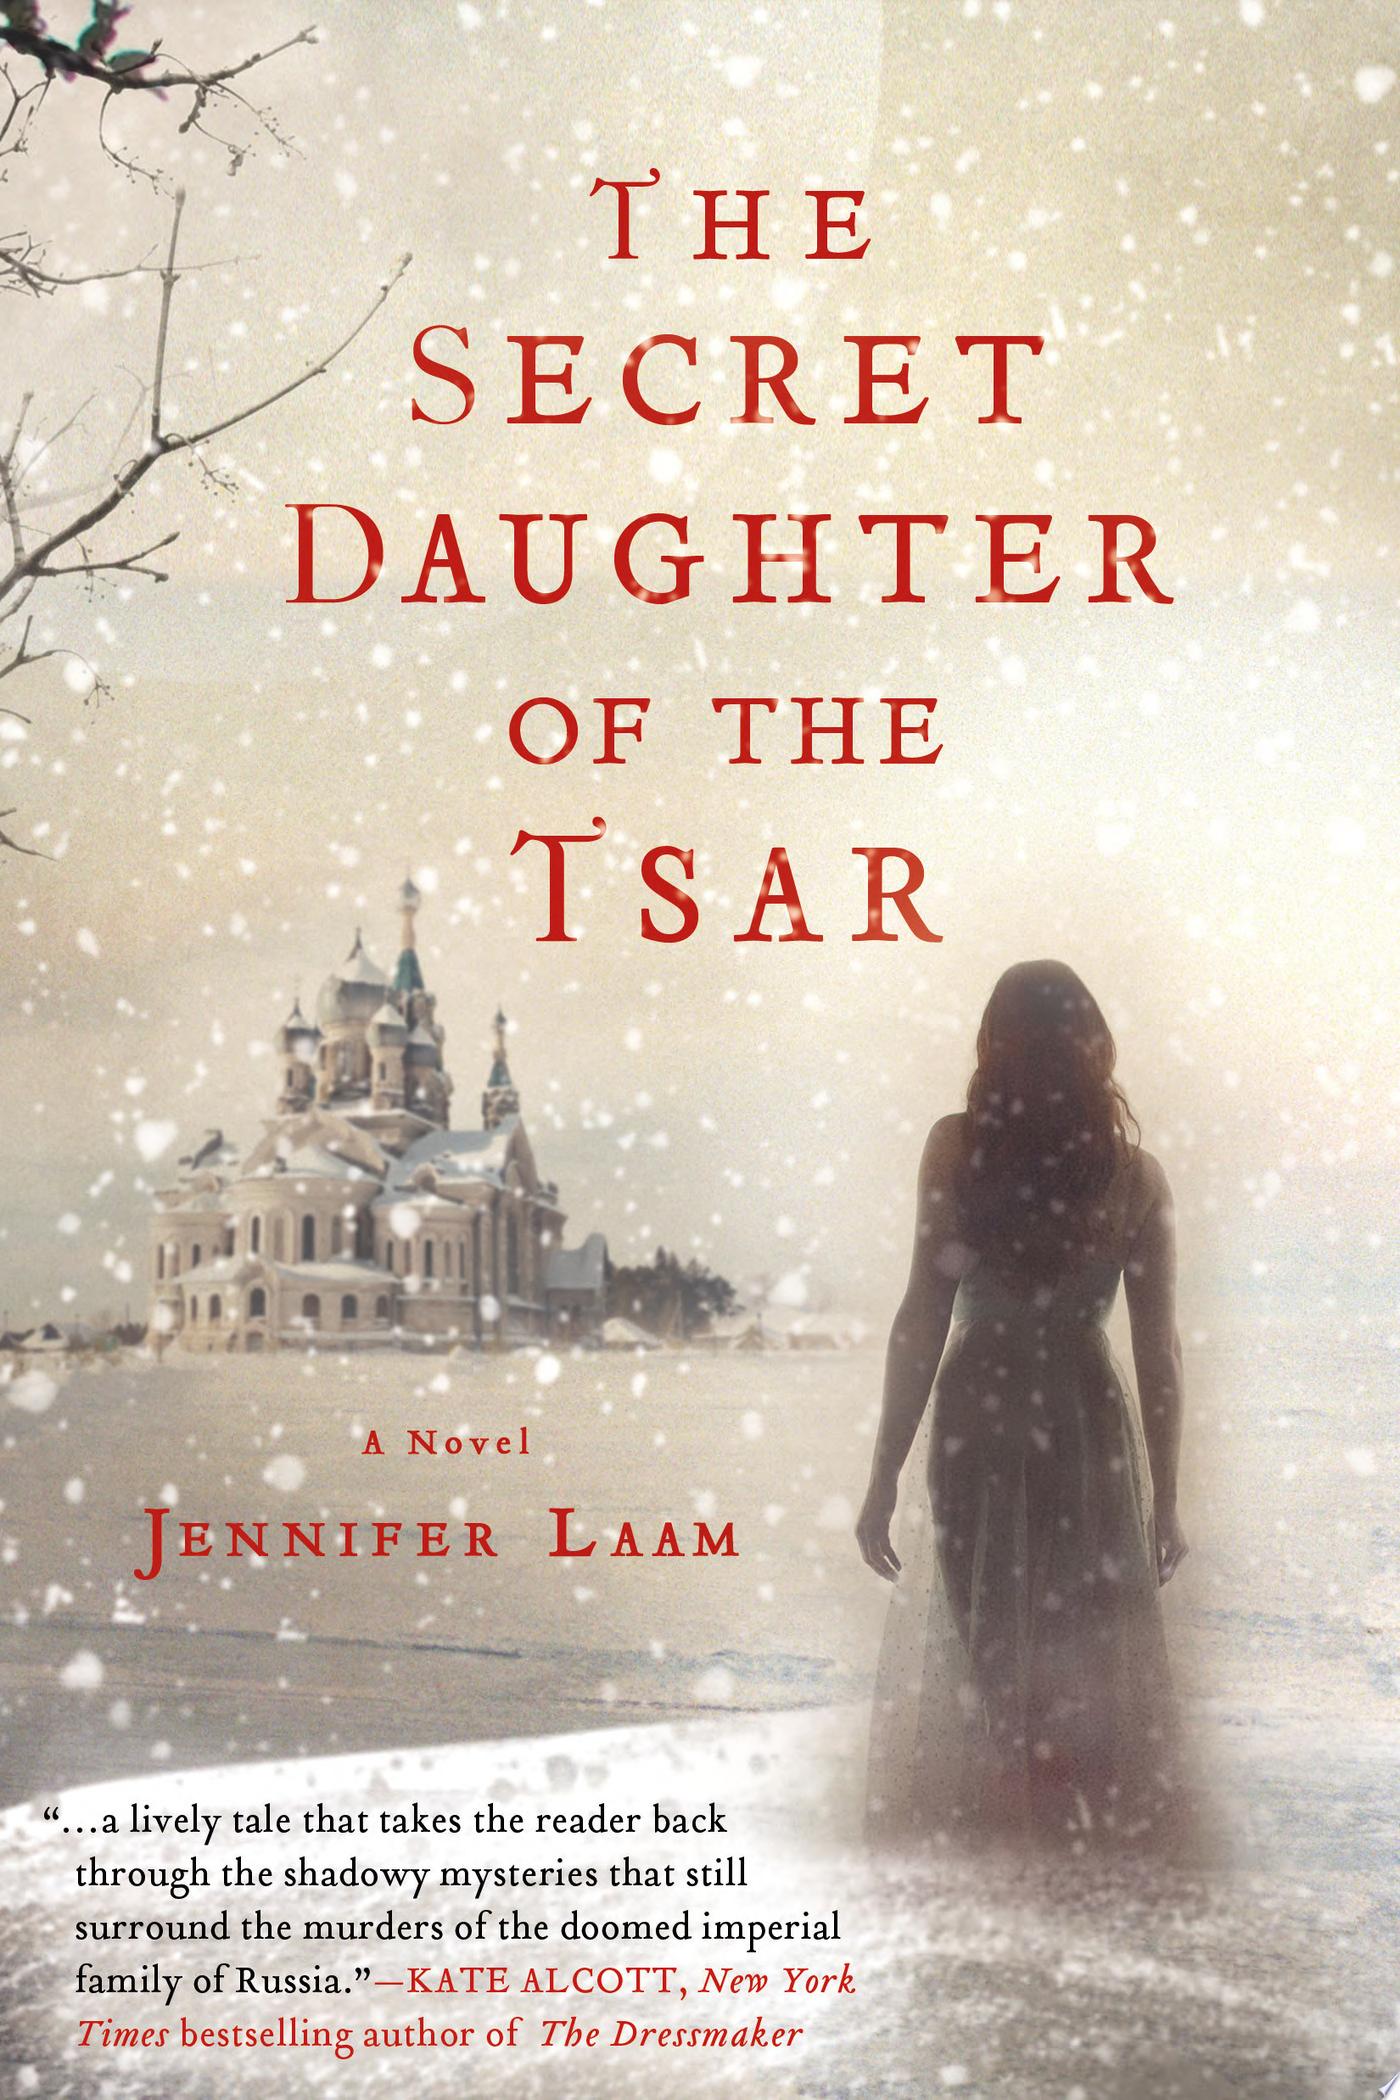 Image for "The Secret Daughter of the Tsar"